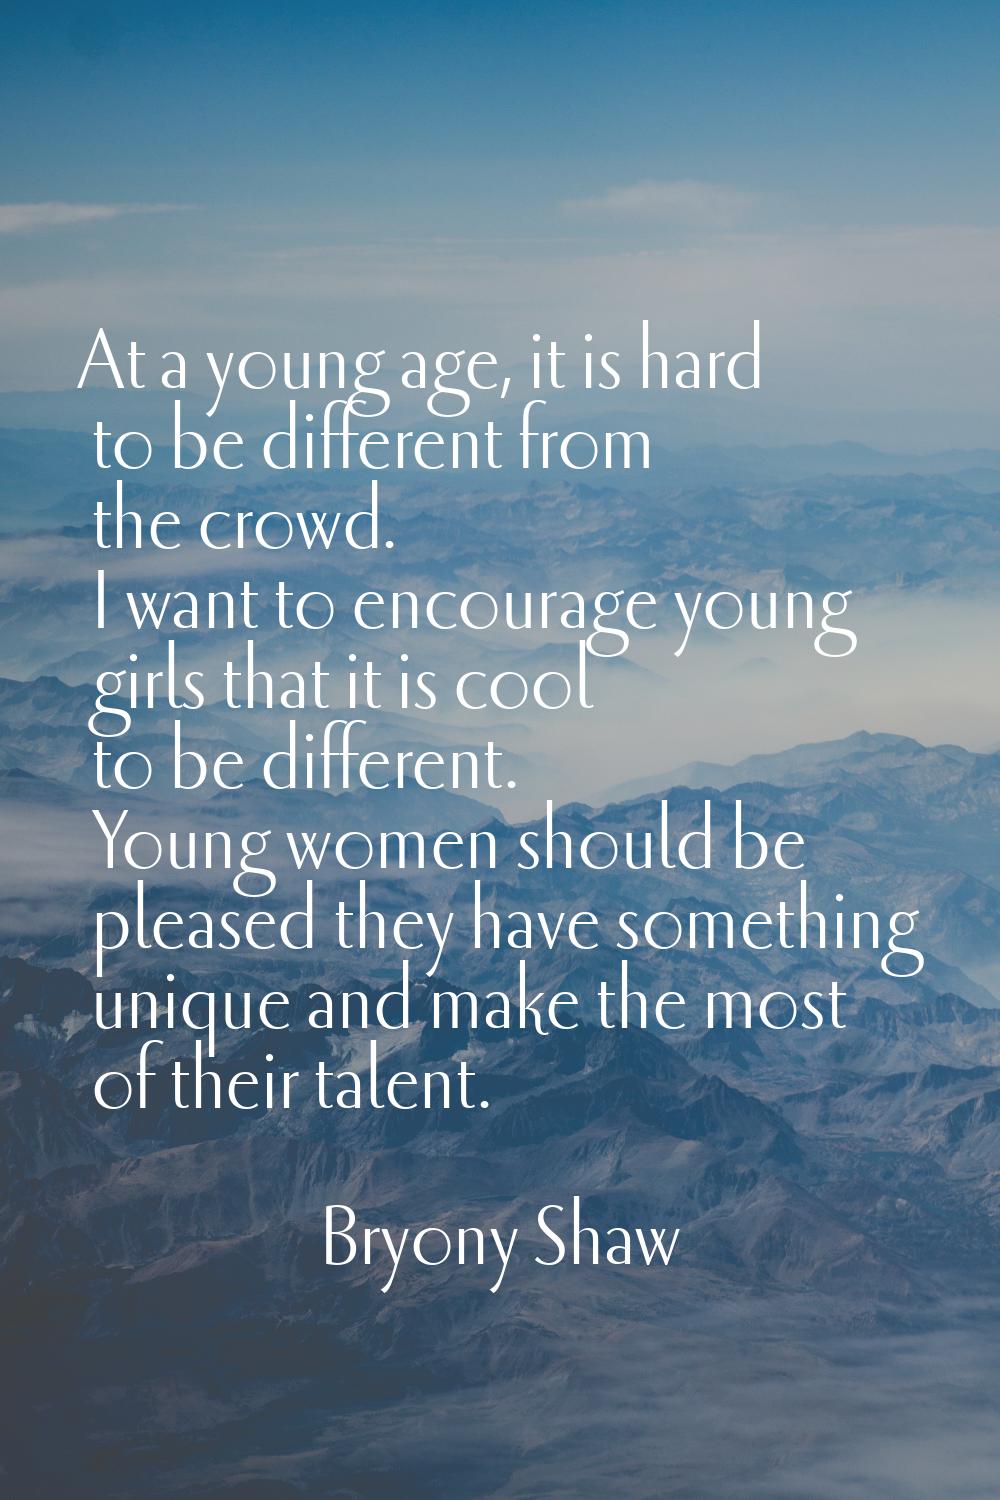 At a young age, it is hard to be different from the crowd. I want to encourage young girls that it 